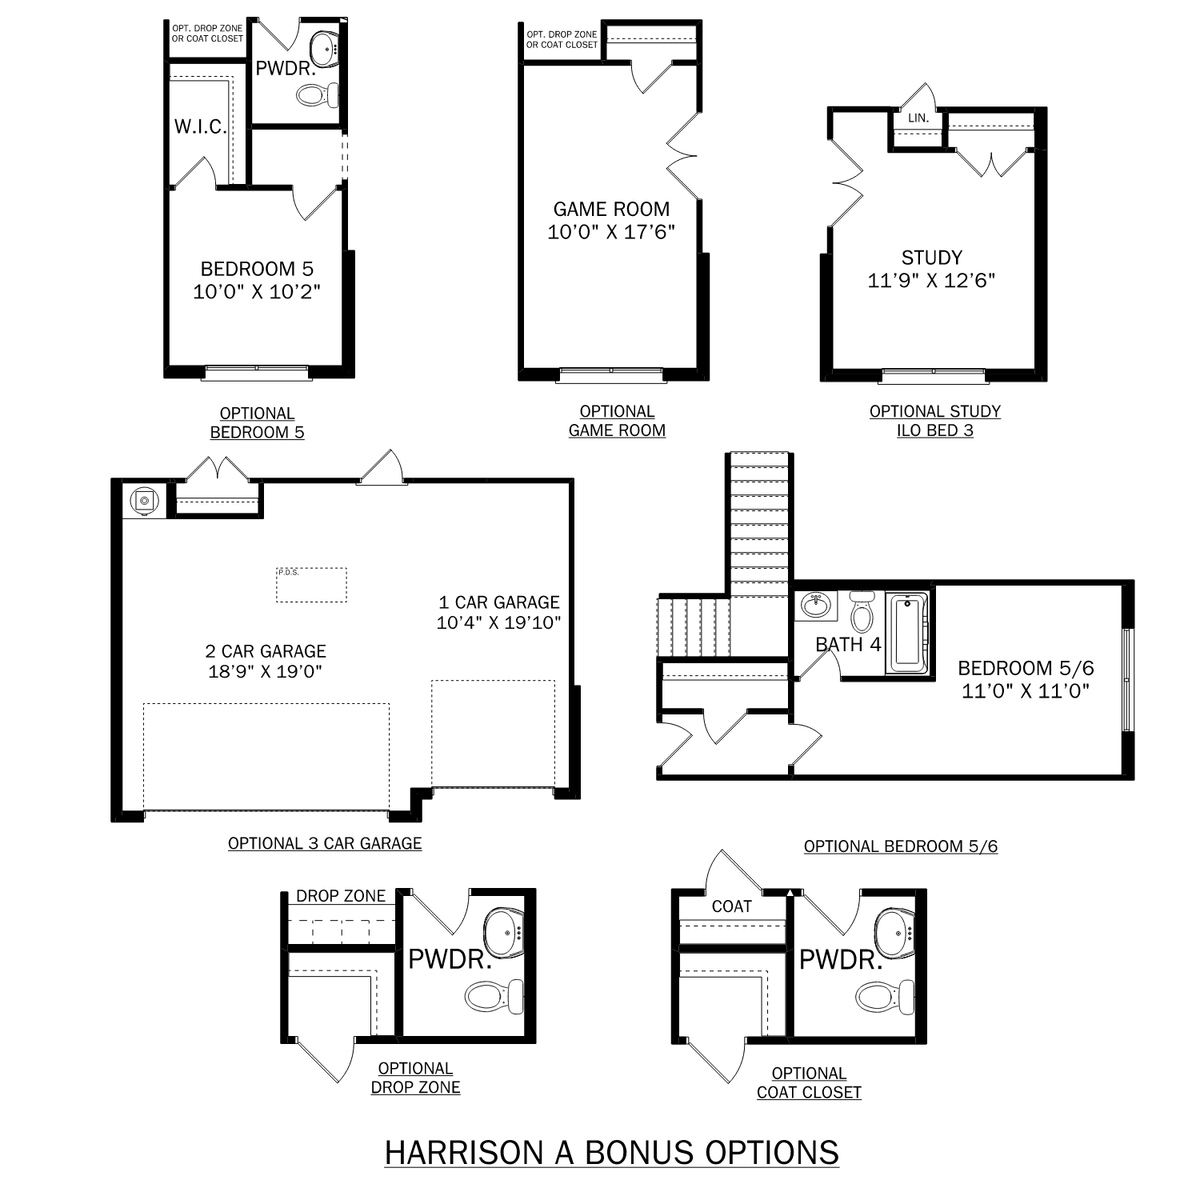 3 - The Harrison with Bonus buildable floor plan layout in Davidson Homes' Creekside community.